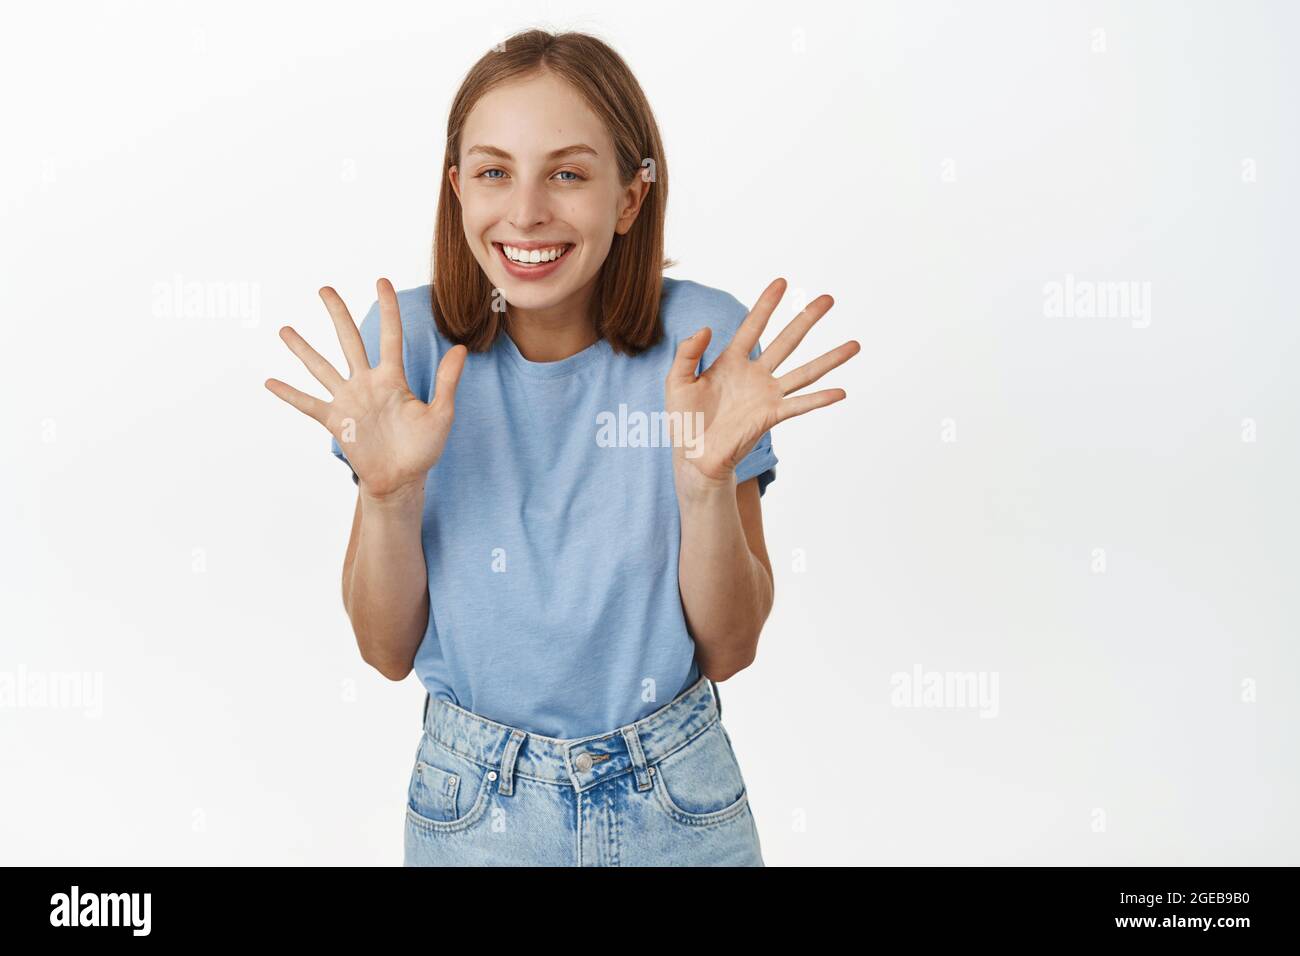 Portrait of cheerful blond girl shaking jazz hands, show empty arms and smiling excited, standing in blue t-shirt and jeans against white background Stock Photo